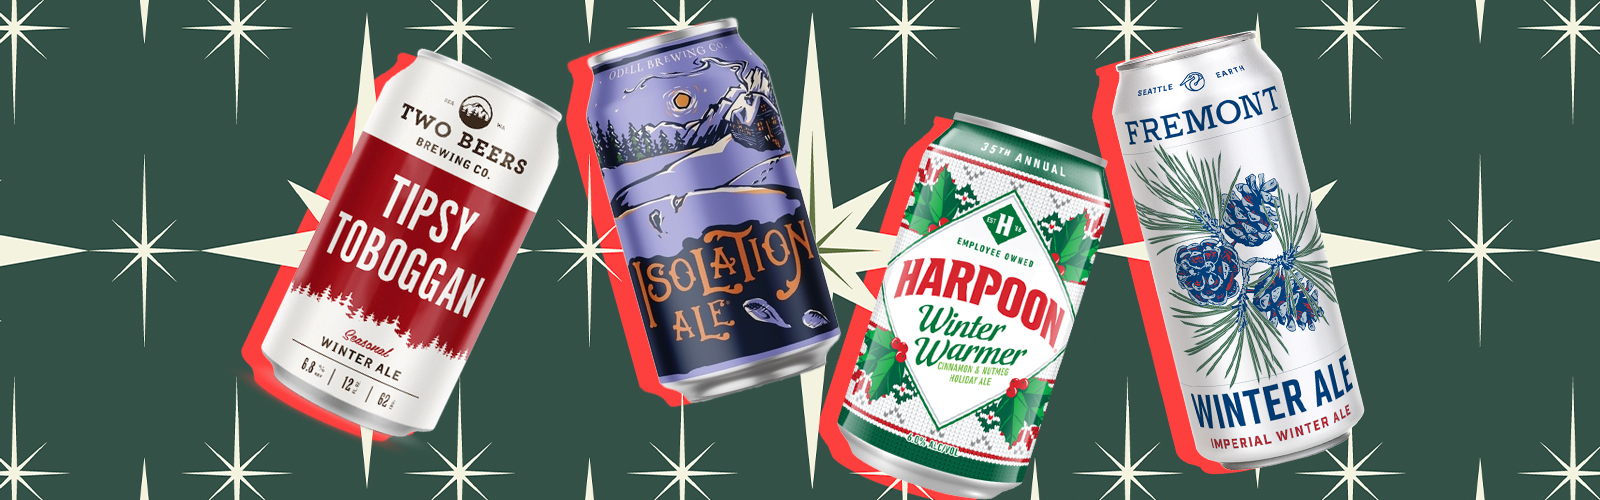 Two Beers/Odell/Harpoon/Fremont/istock/Uproxx